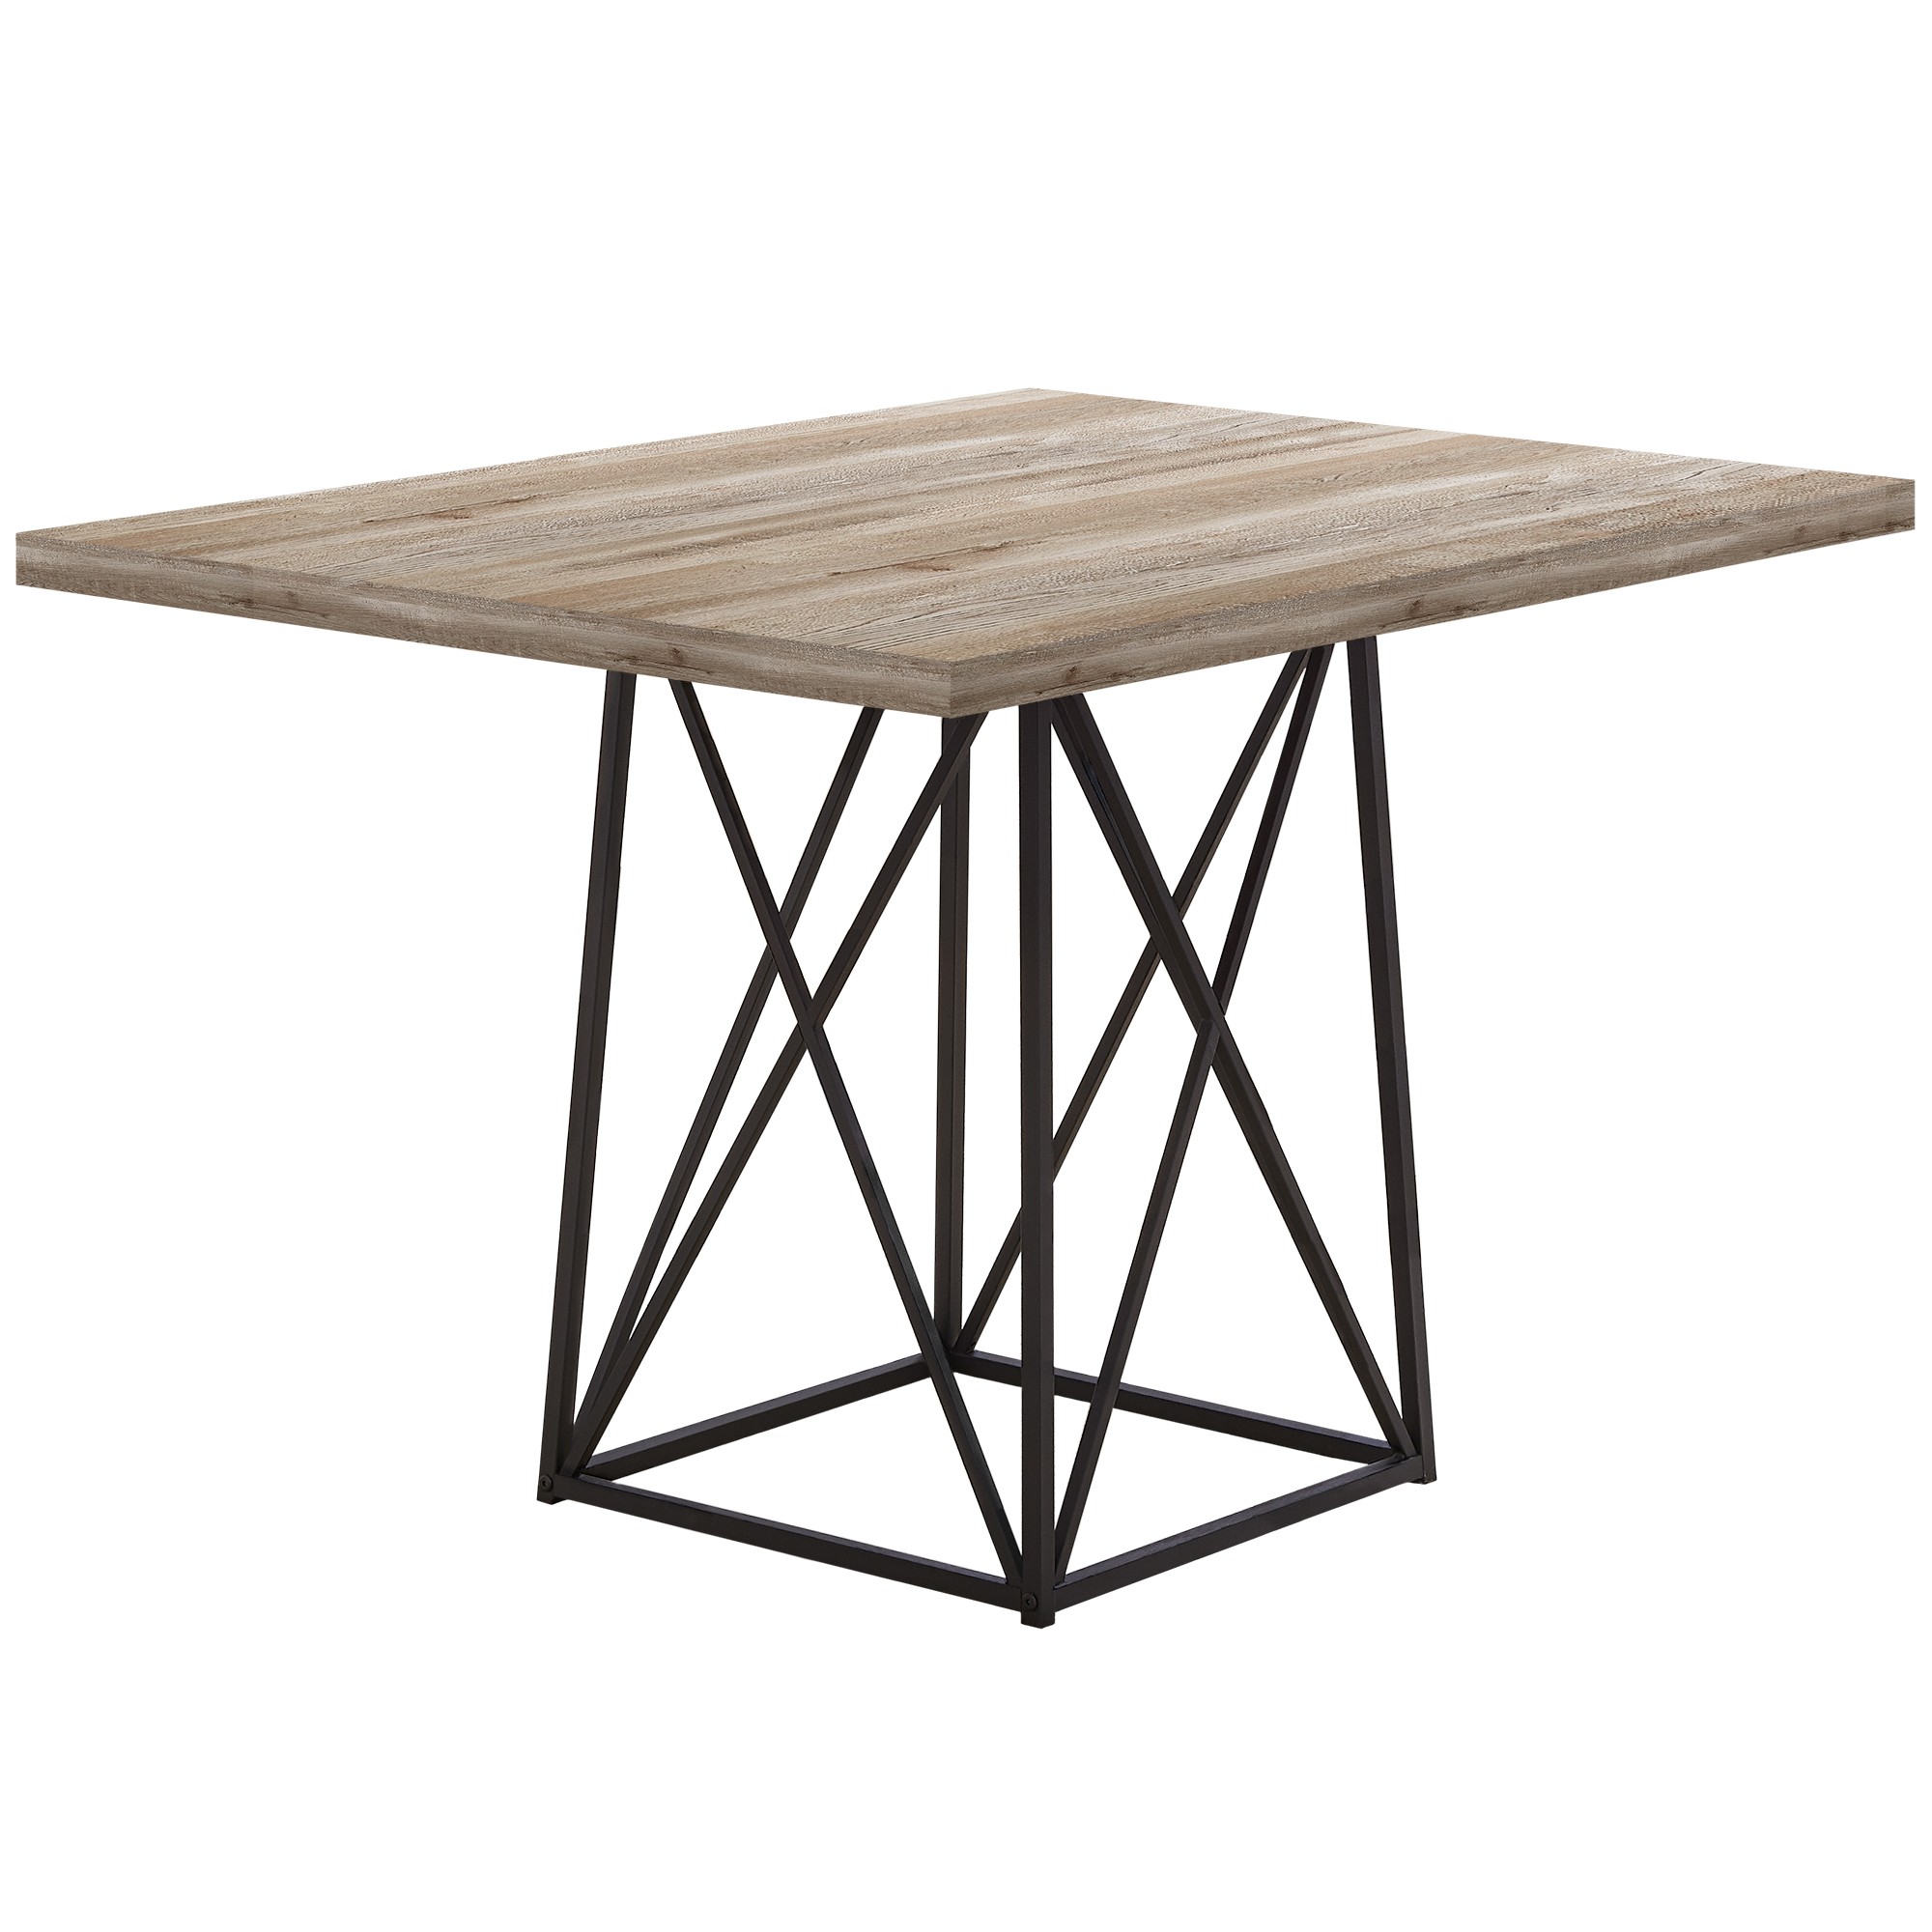 36" x 48" x 31" Dark Taupe Particle Board Metal Dining Table